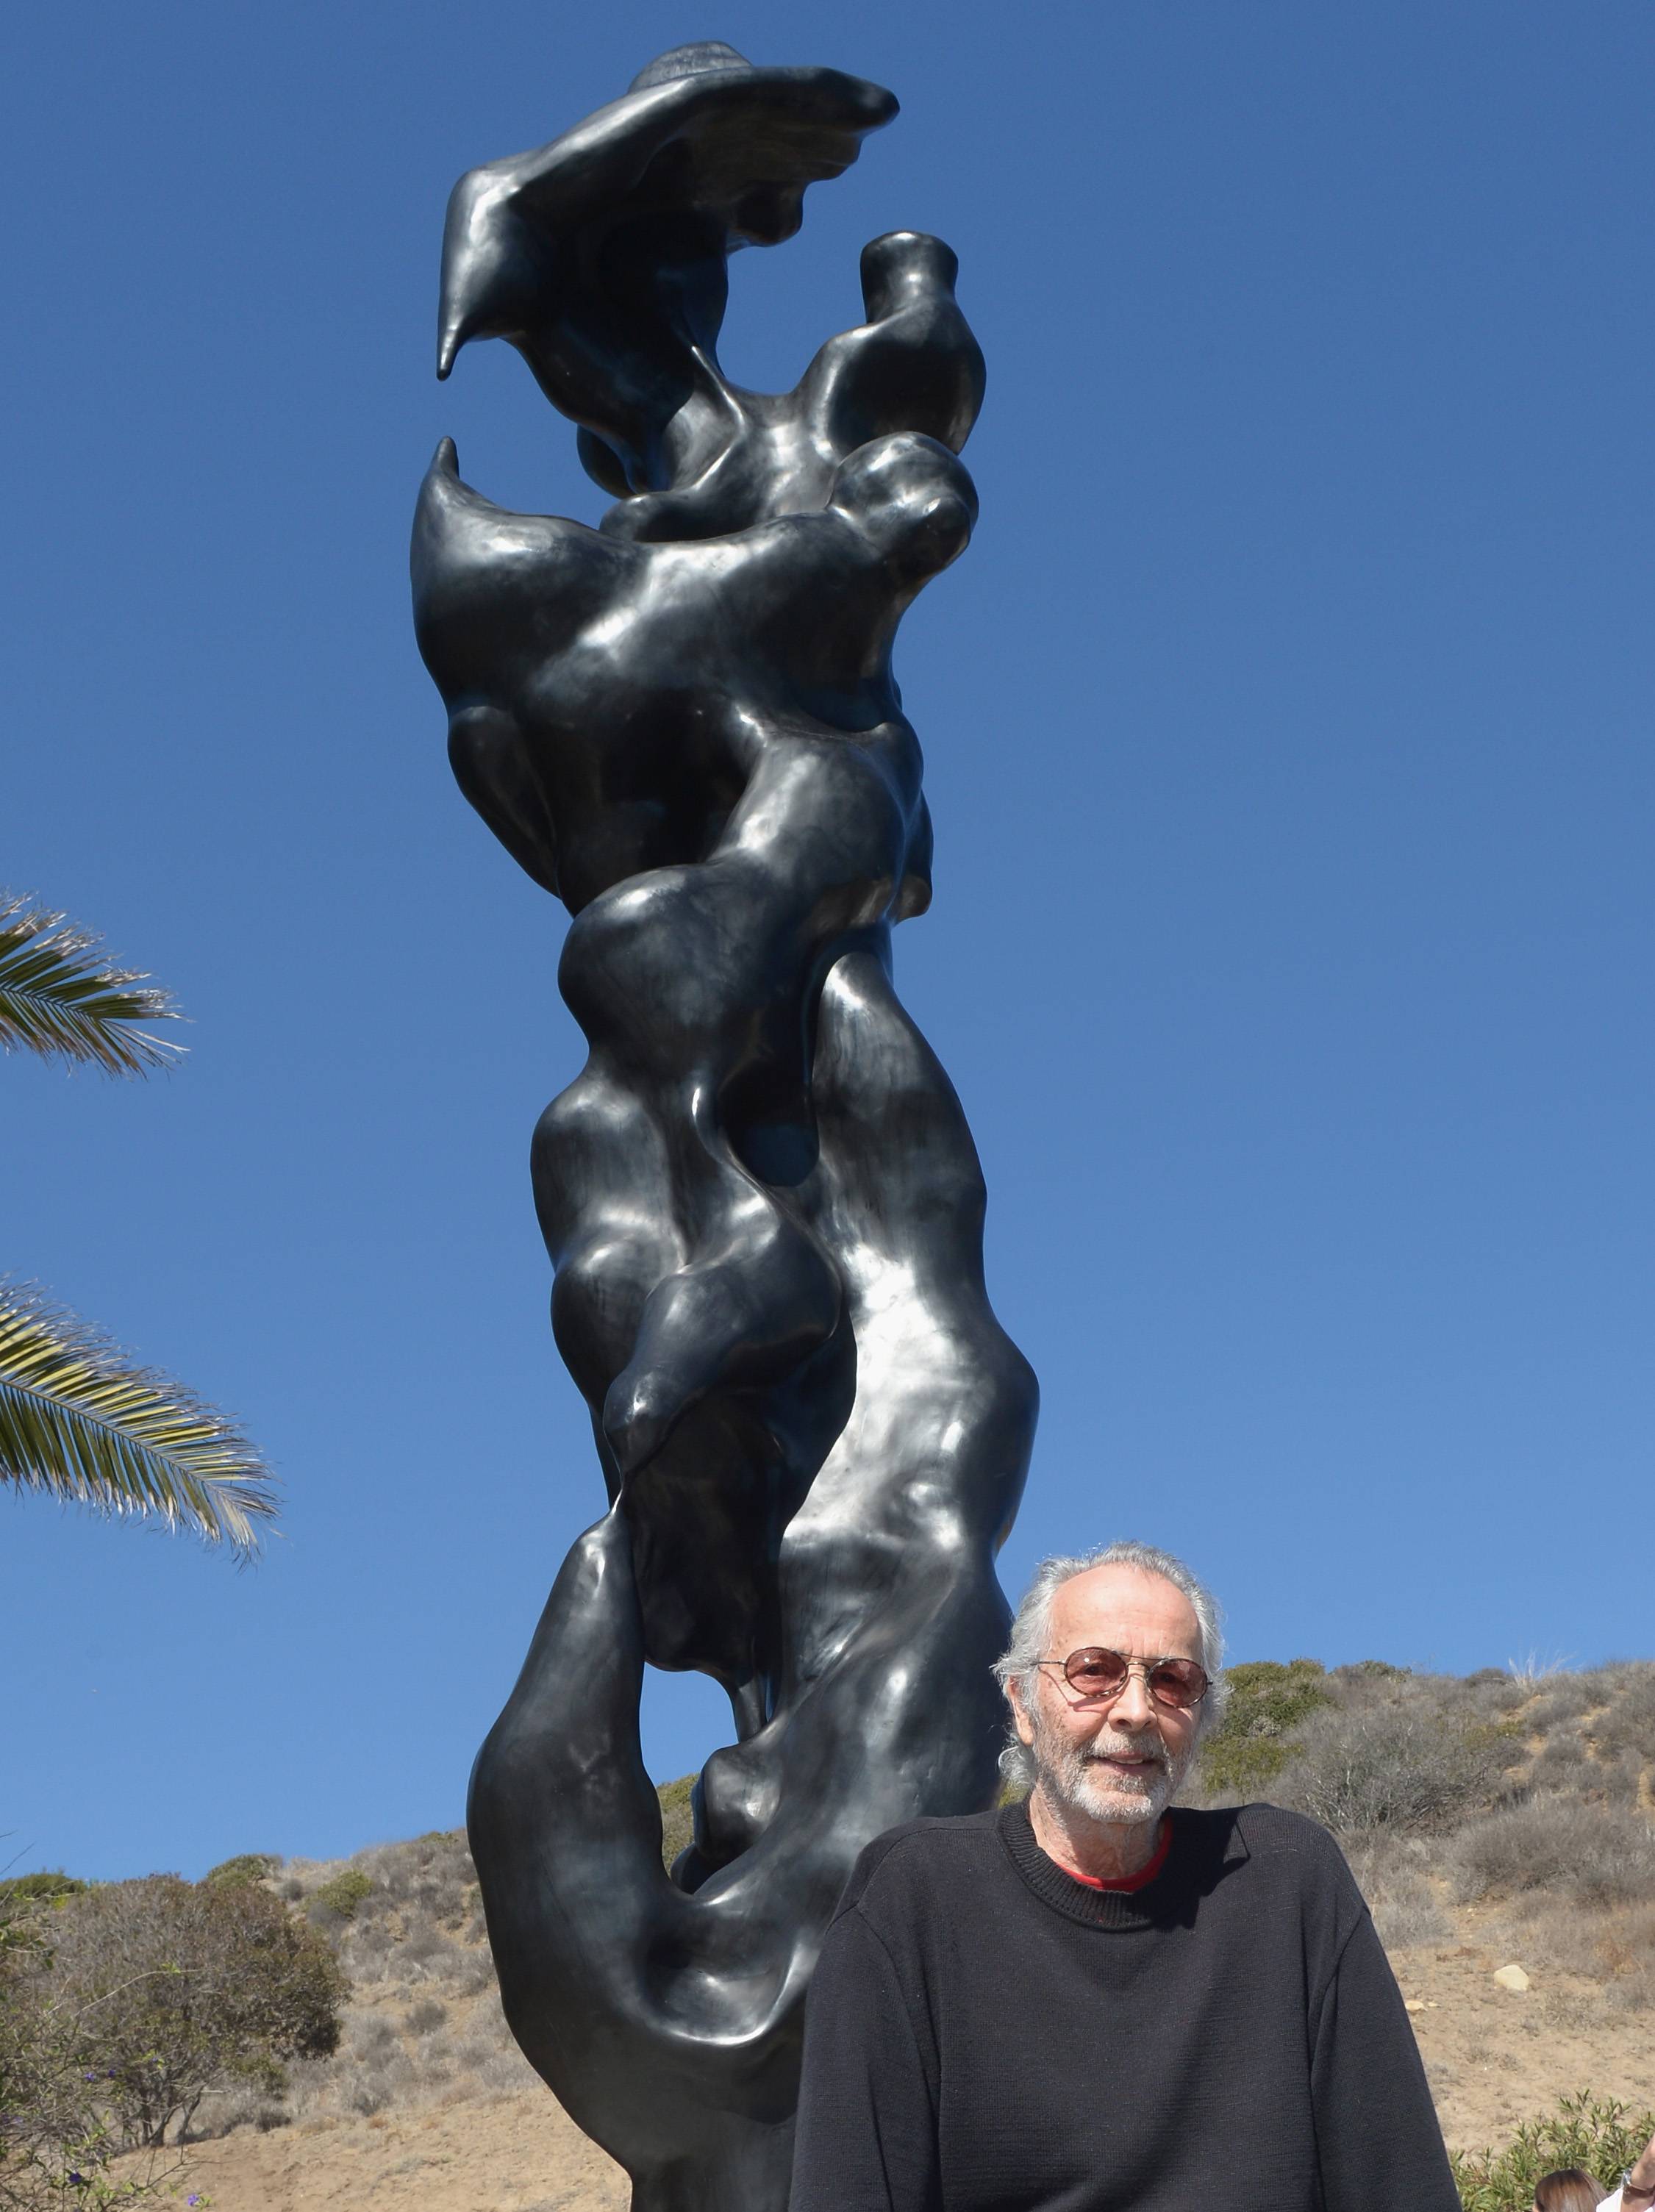 Herb Alpert And His Totem Sculpture 'Freedom' Honored in Malibu